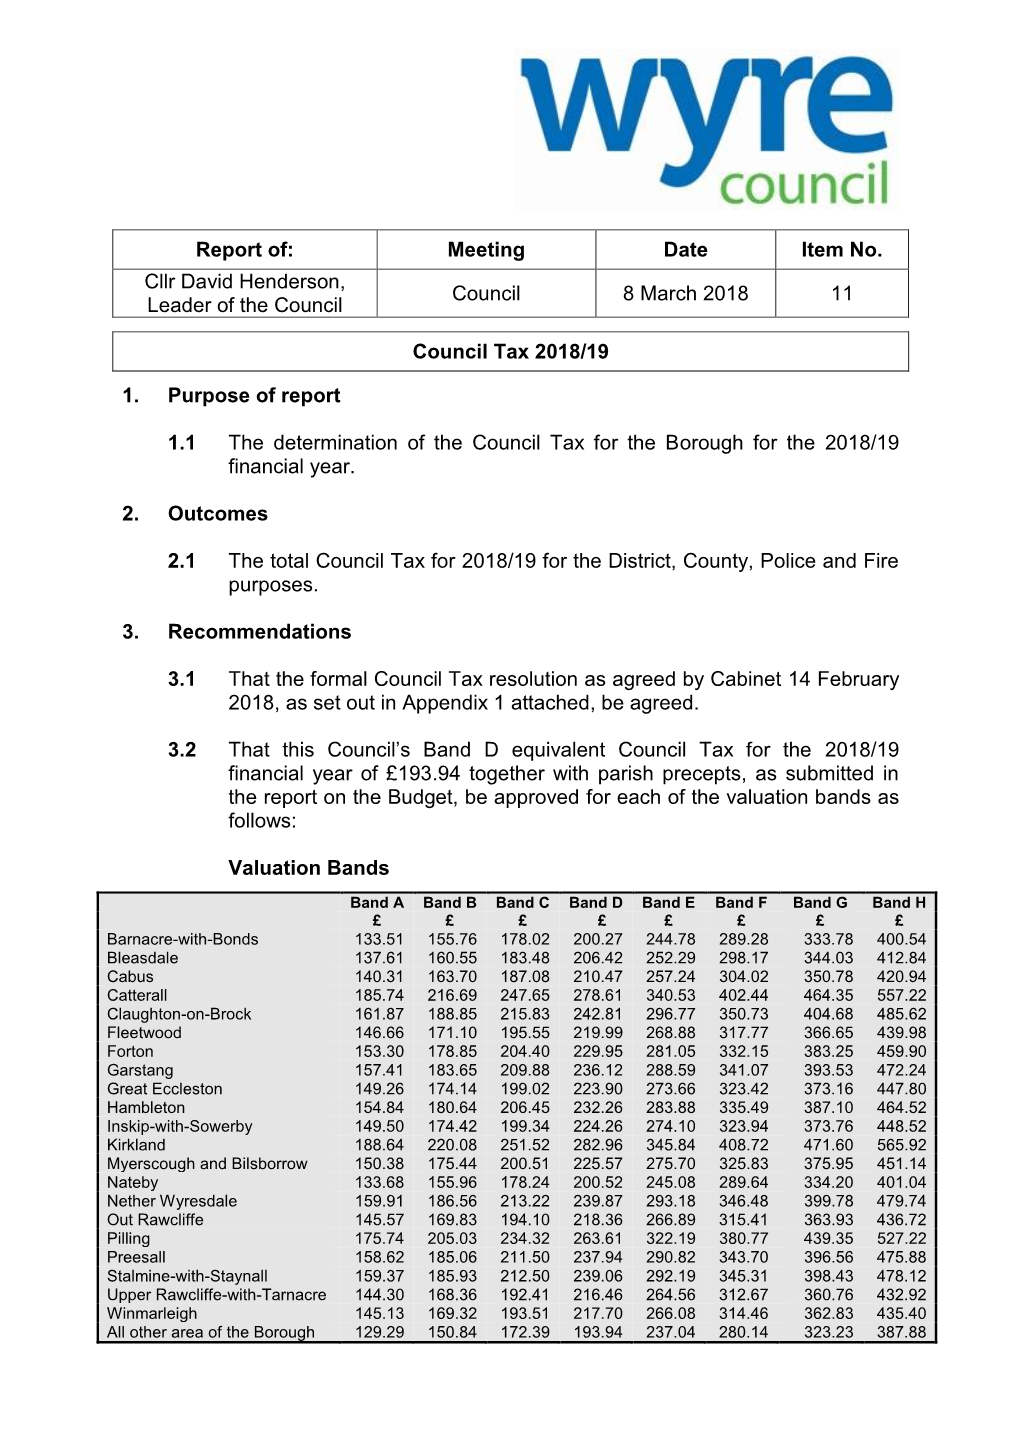 Wyre Borough Council for 2018/19 As Recommended by the Cabinet at Their Meeting of the 14 February 2018 Is Detailed Below